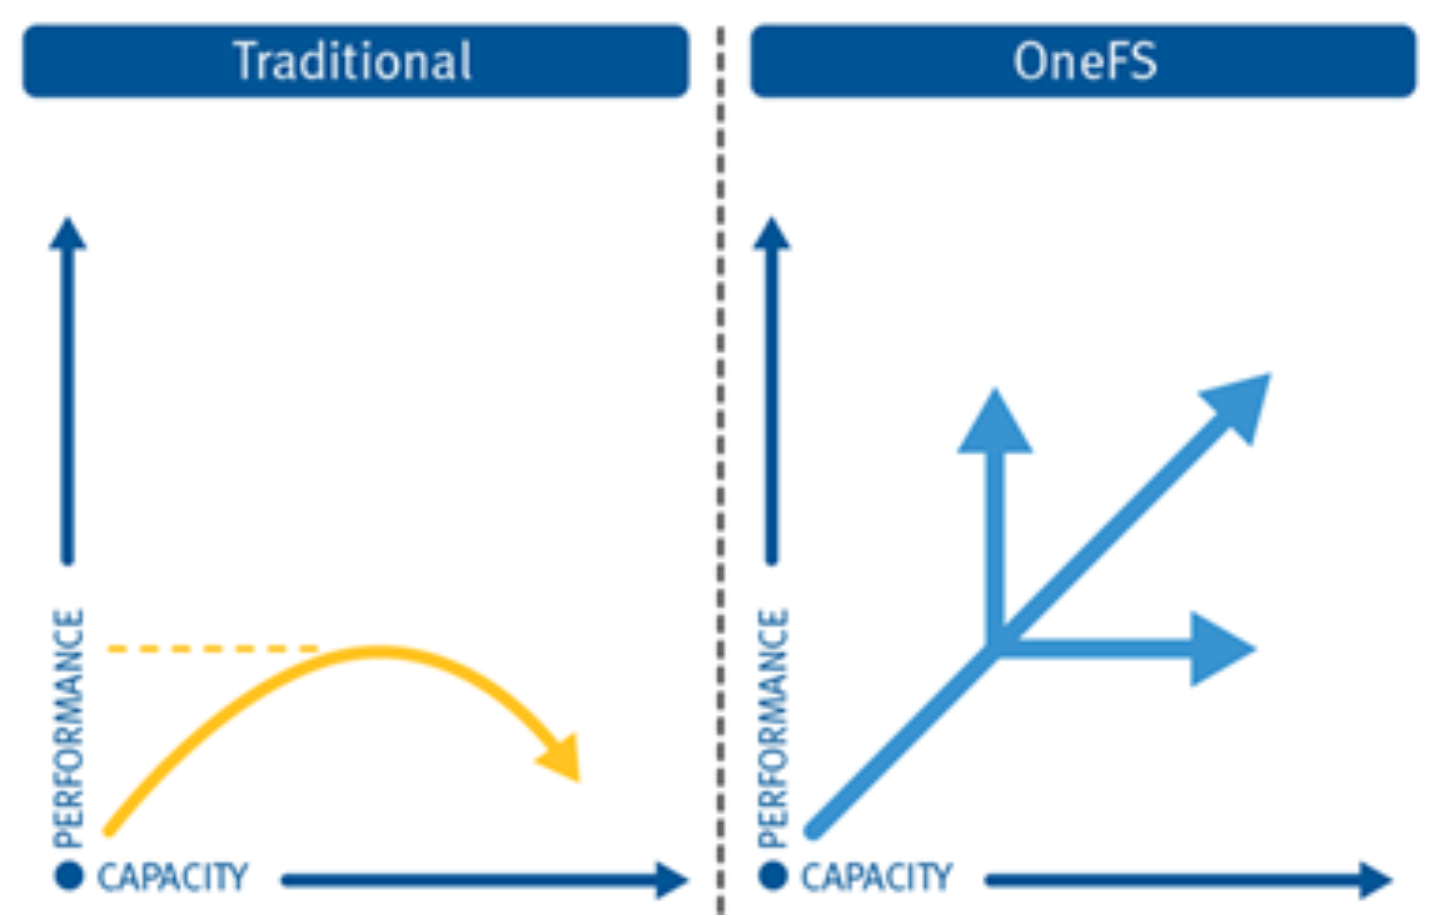 Graphic illustrating OneFS linear scalability with capacity on the x axis and performance on the y axis.